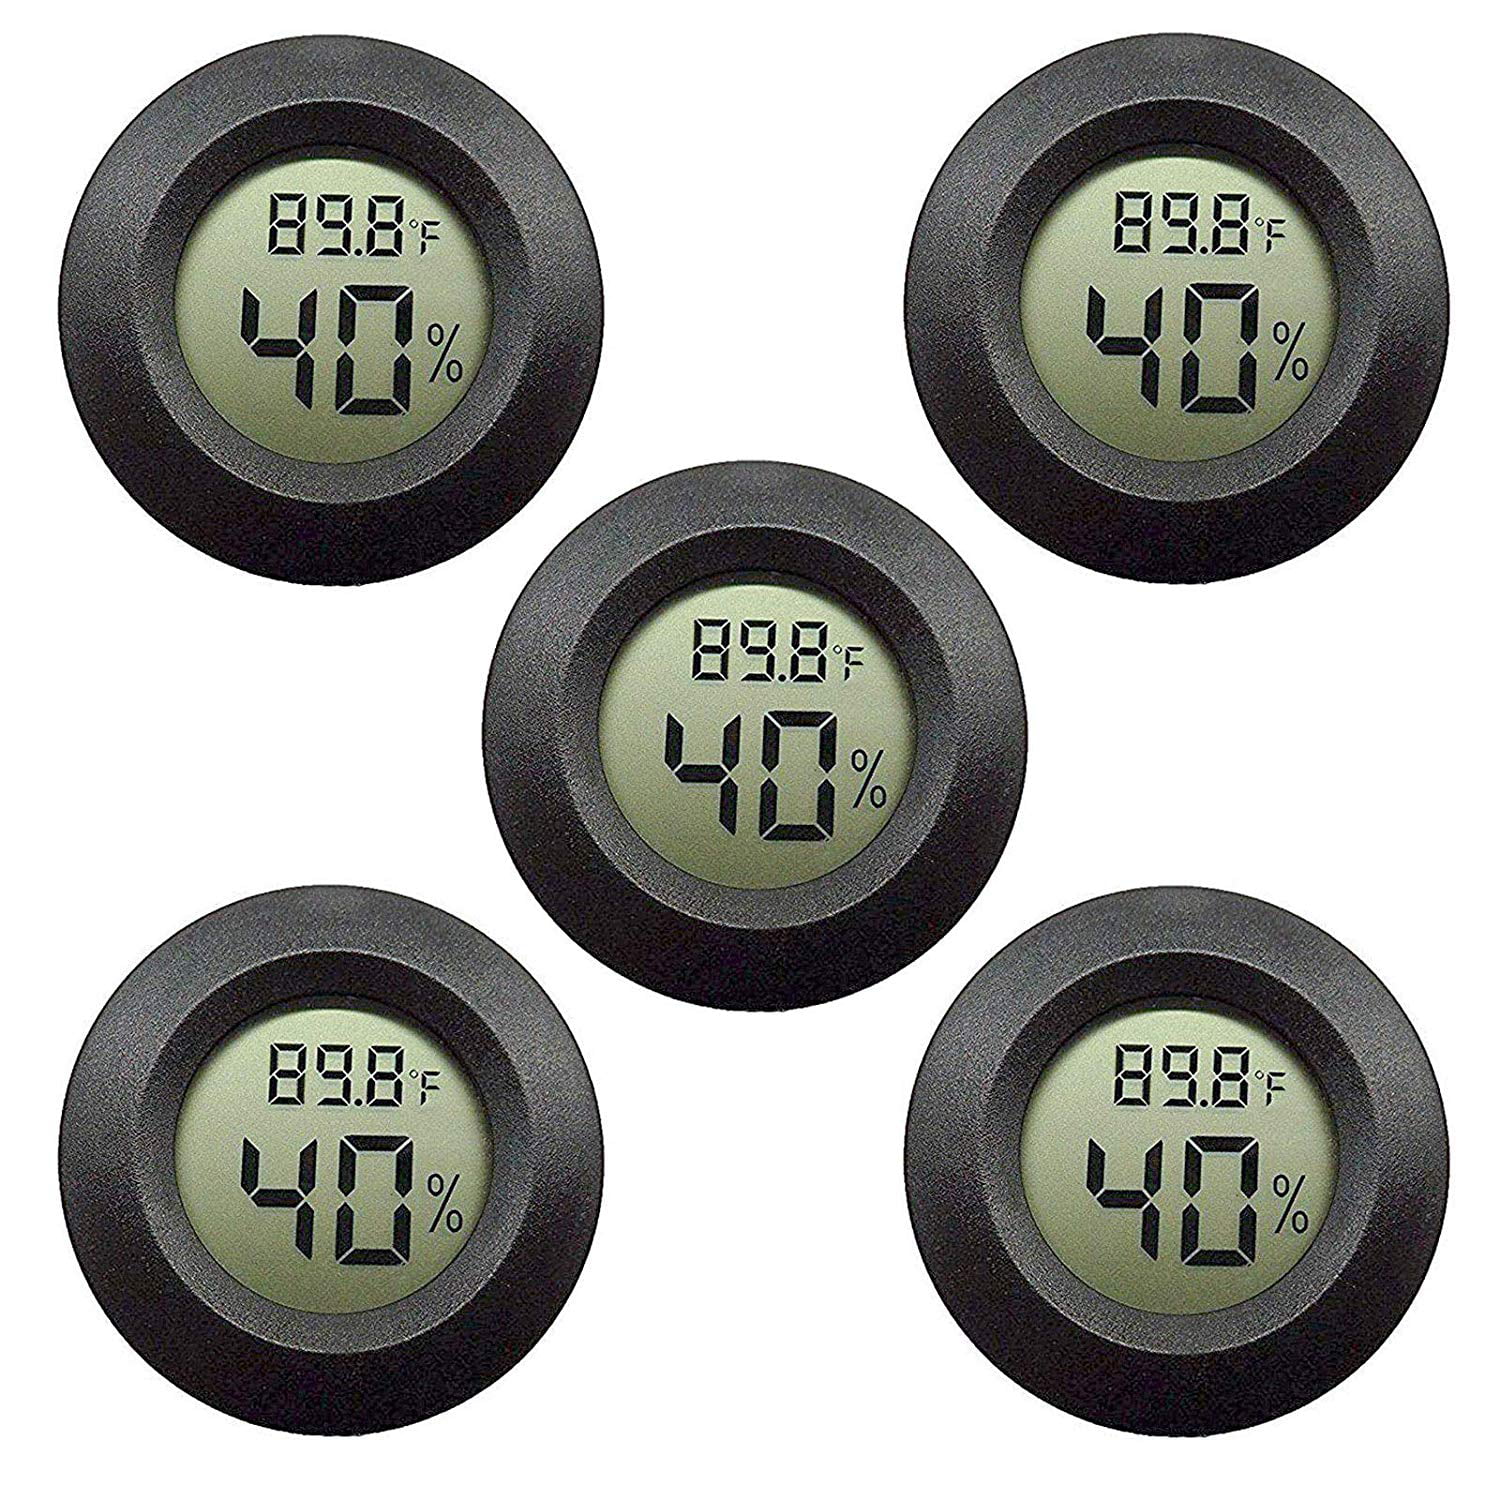 Large Round Hygrometer Thermometer Humidity Temperature Monitor Meter Gauge 